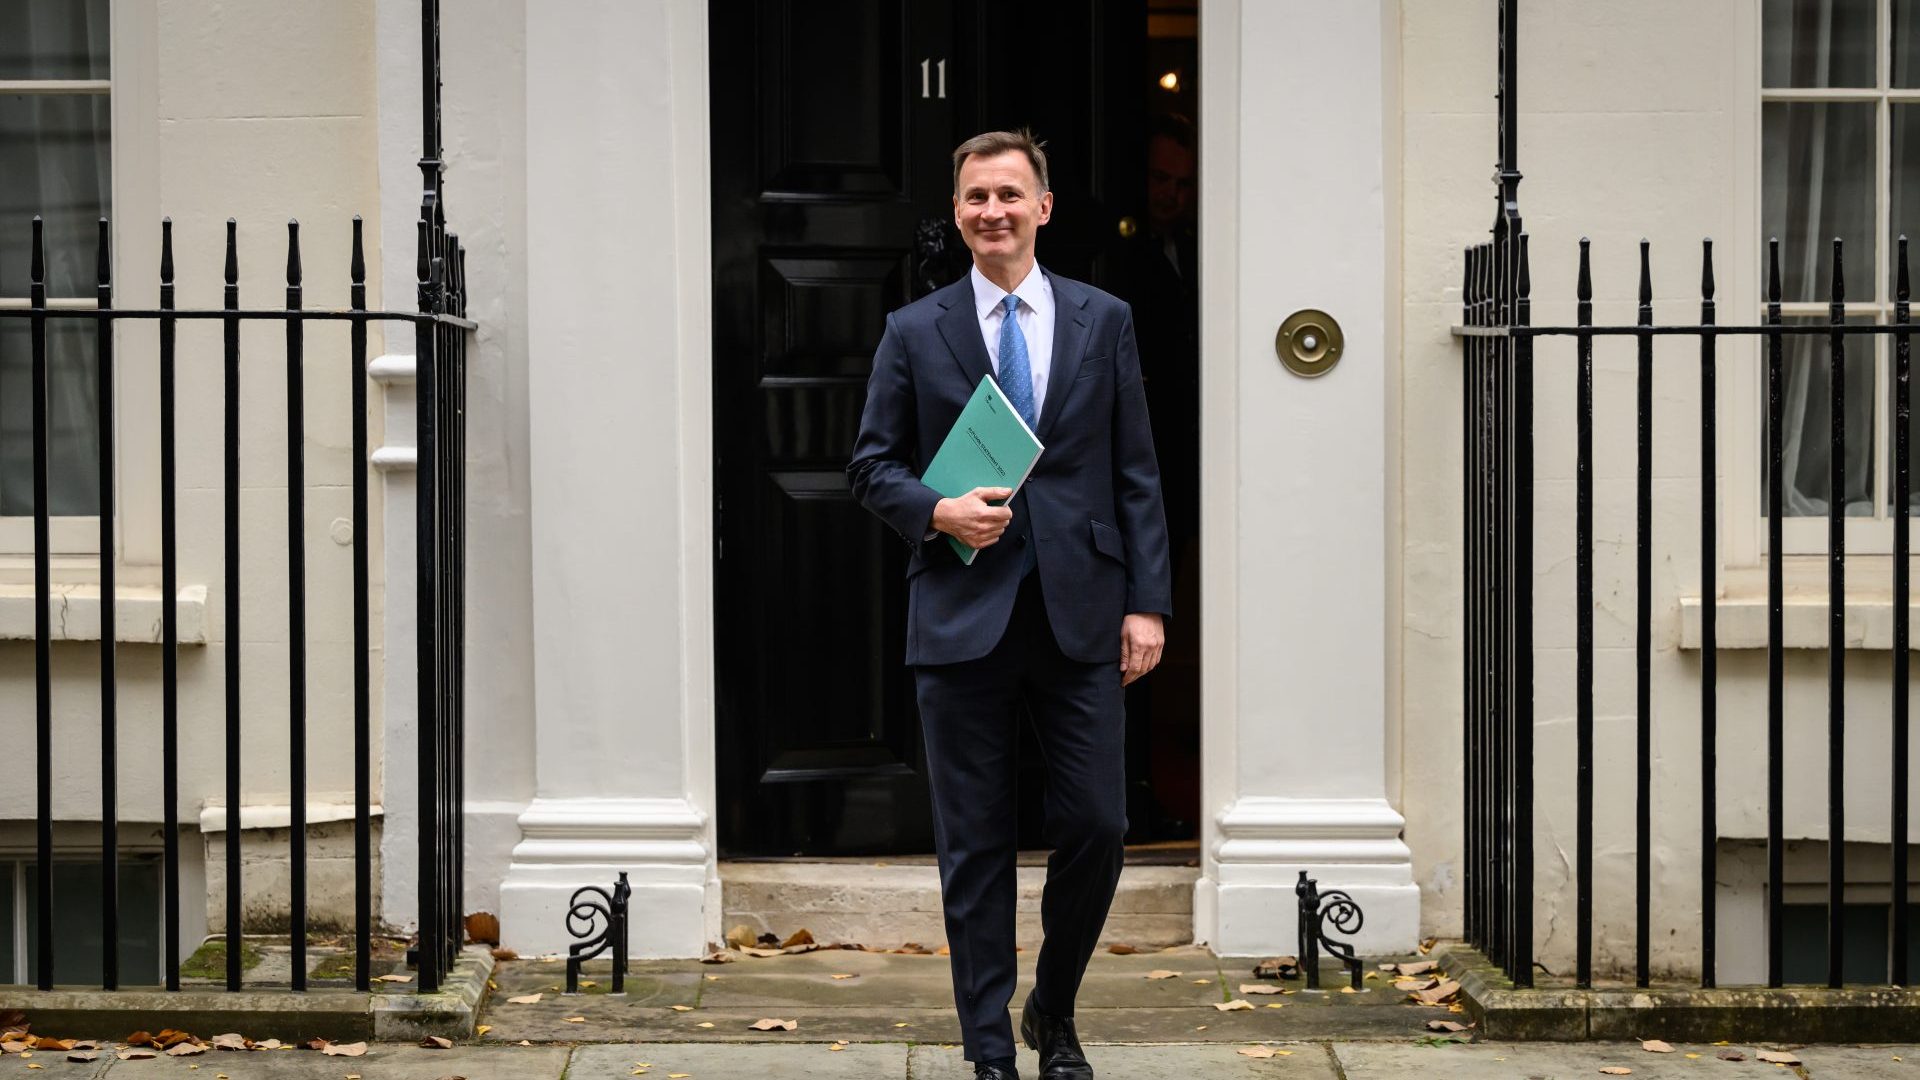 Chancellor of the Exchequer Jeremy Hunt leaves number 11 Downing Street. Photo: Leon Neal/Getty Images